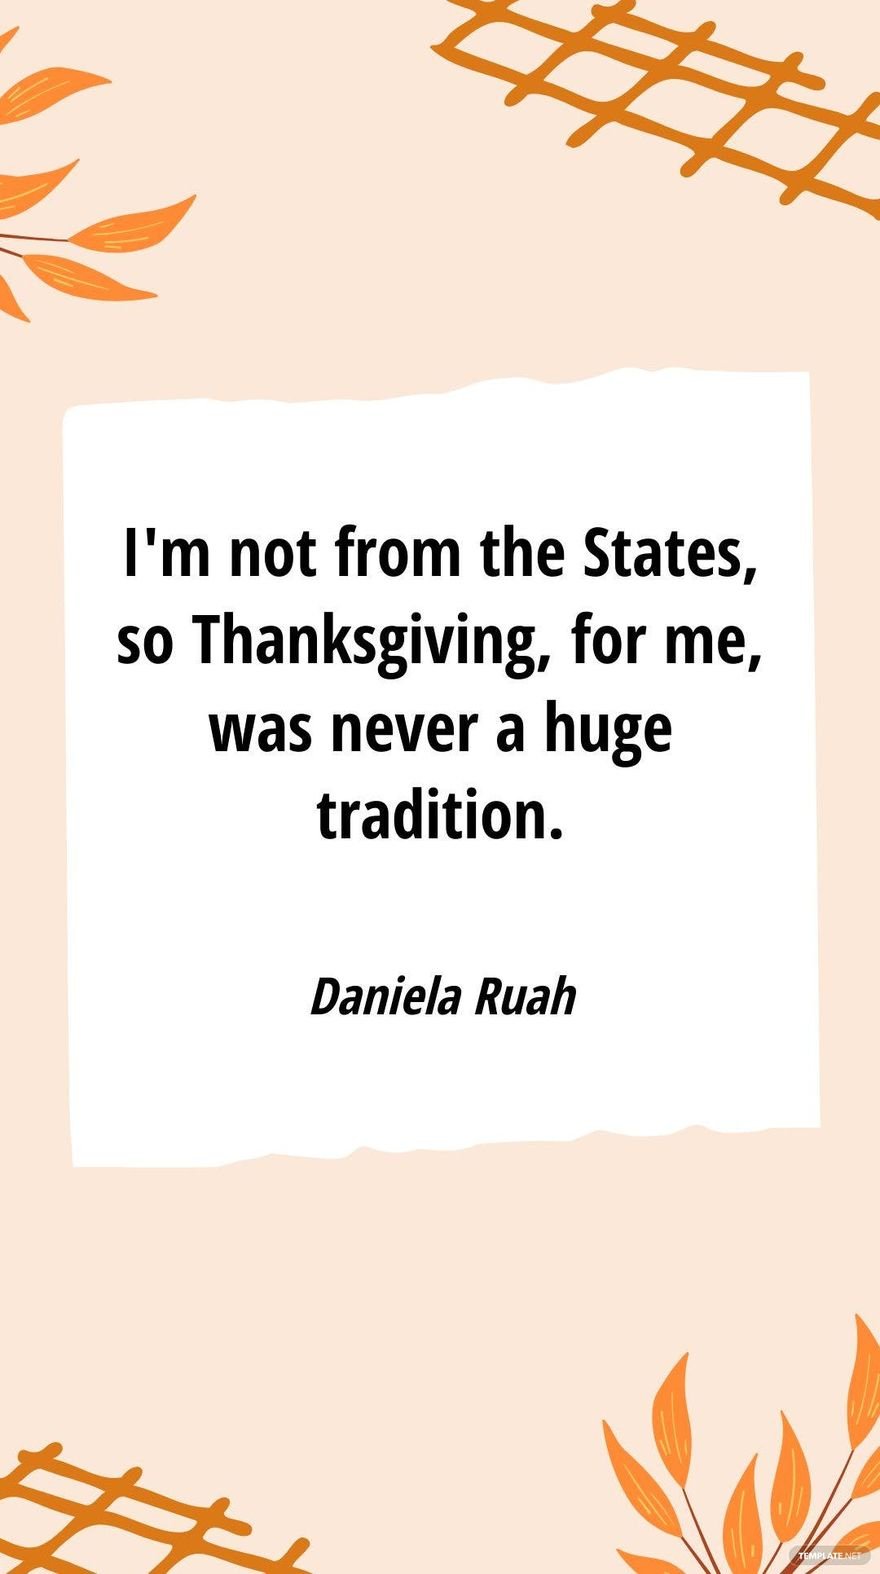 Free Daniela Ruah - I'm not from the States, so Thanksgiving, for me, was never a huge tradition.